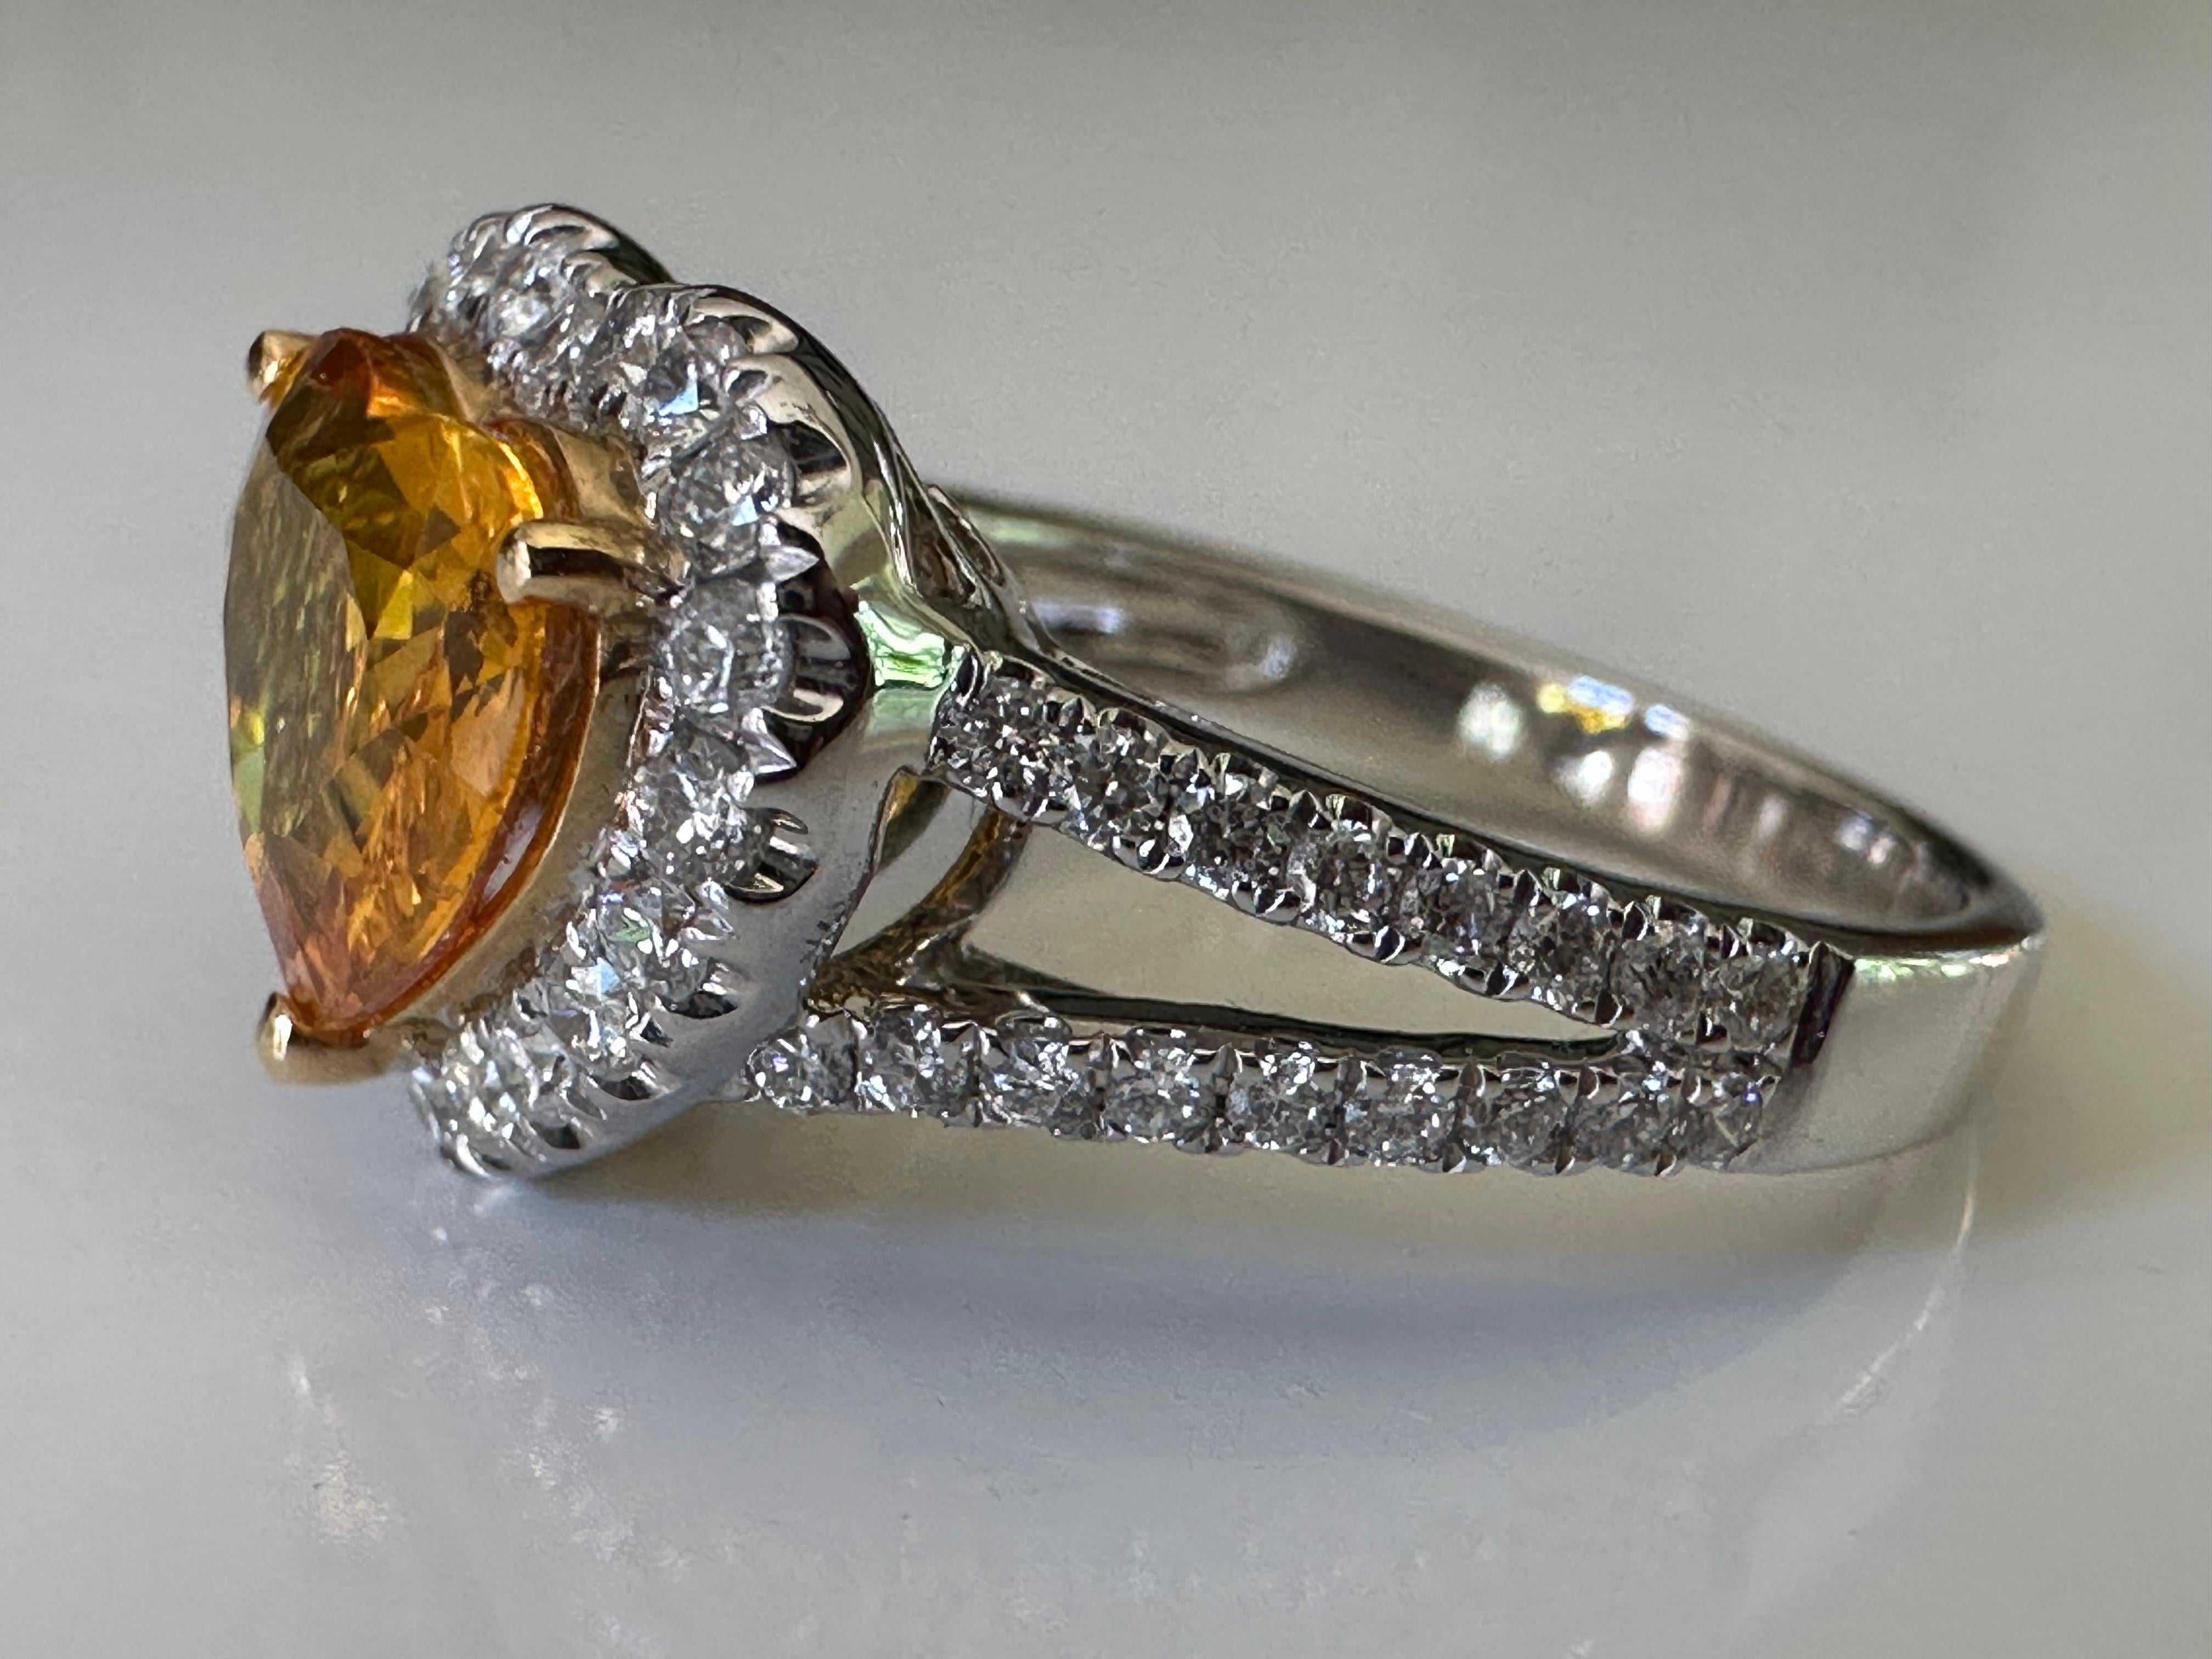 A 2.69-carat natural yellow heart-shaped sapphire from Sri Lanka centers this exquisite ring surrounded by a halo of fifty-four round brilliant-cut diamonds totaling 0.66 carats and accented with a diamond studded split shank. Set in 18k white and